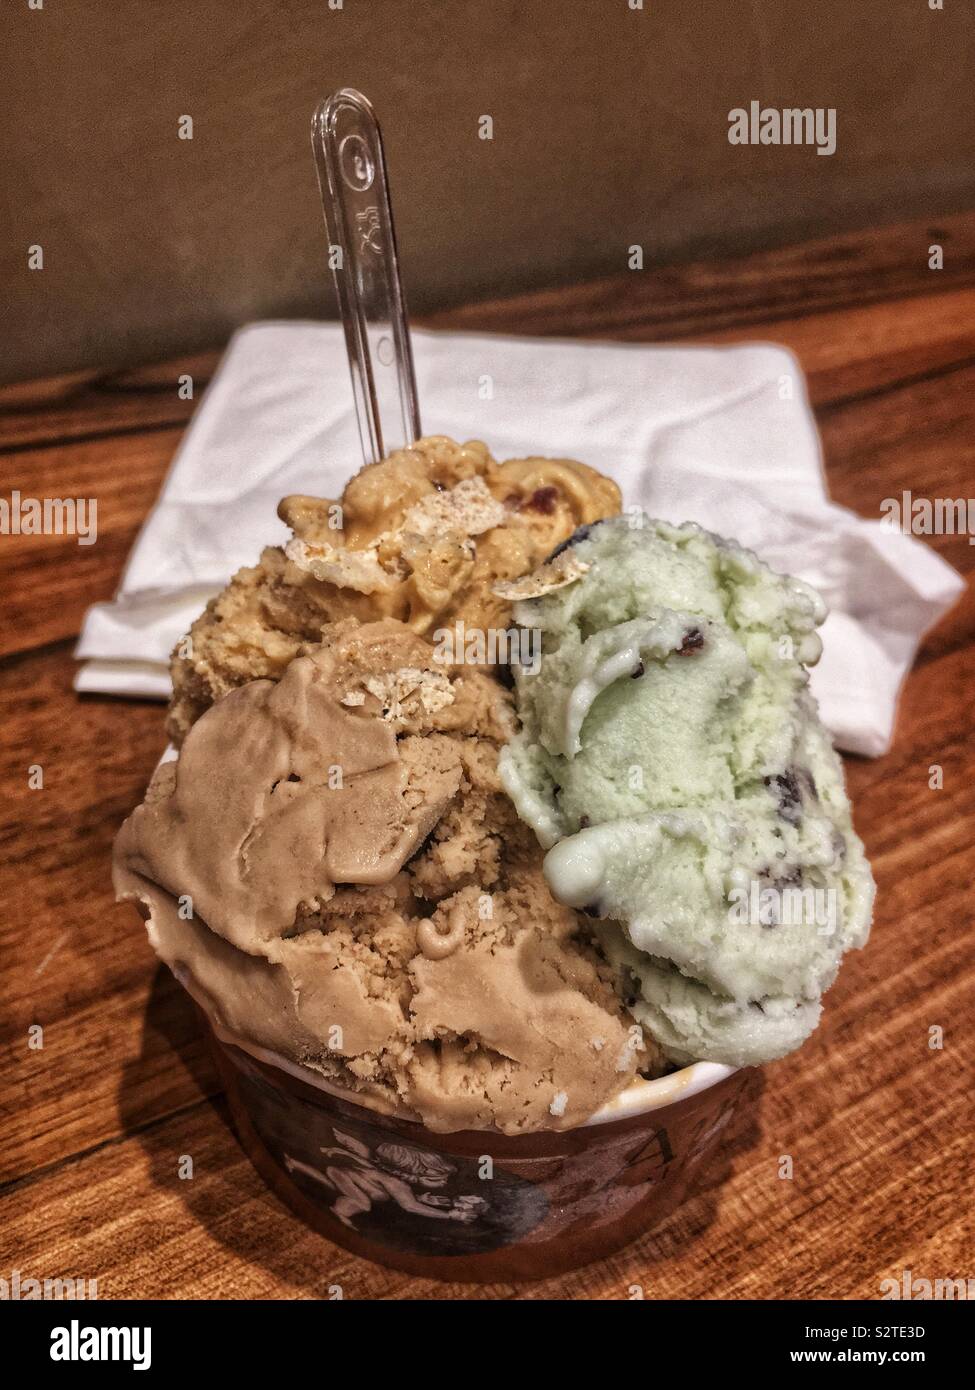 Large cup full of delicious caramel, mint chocolate chip, and hazelnut gelato. Stock Photo